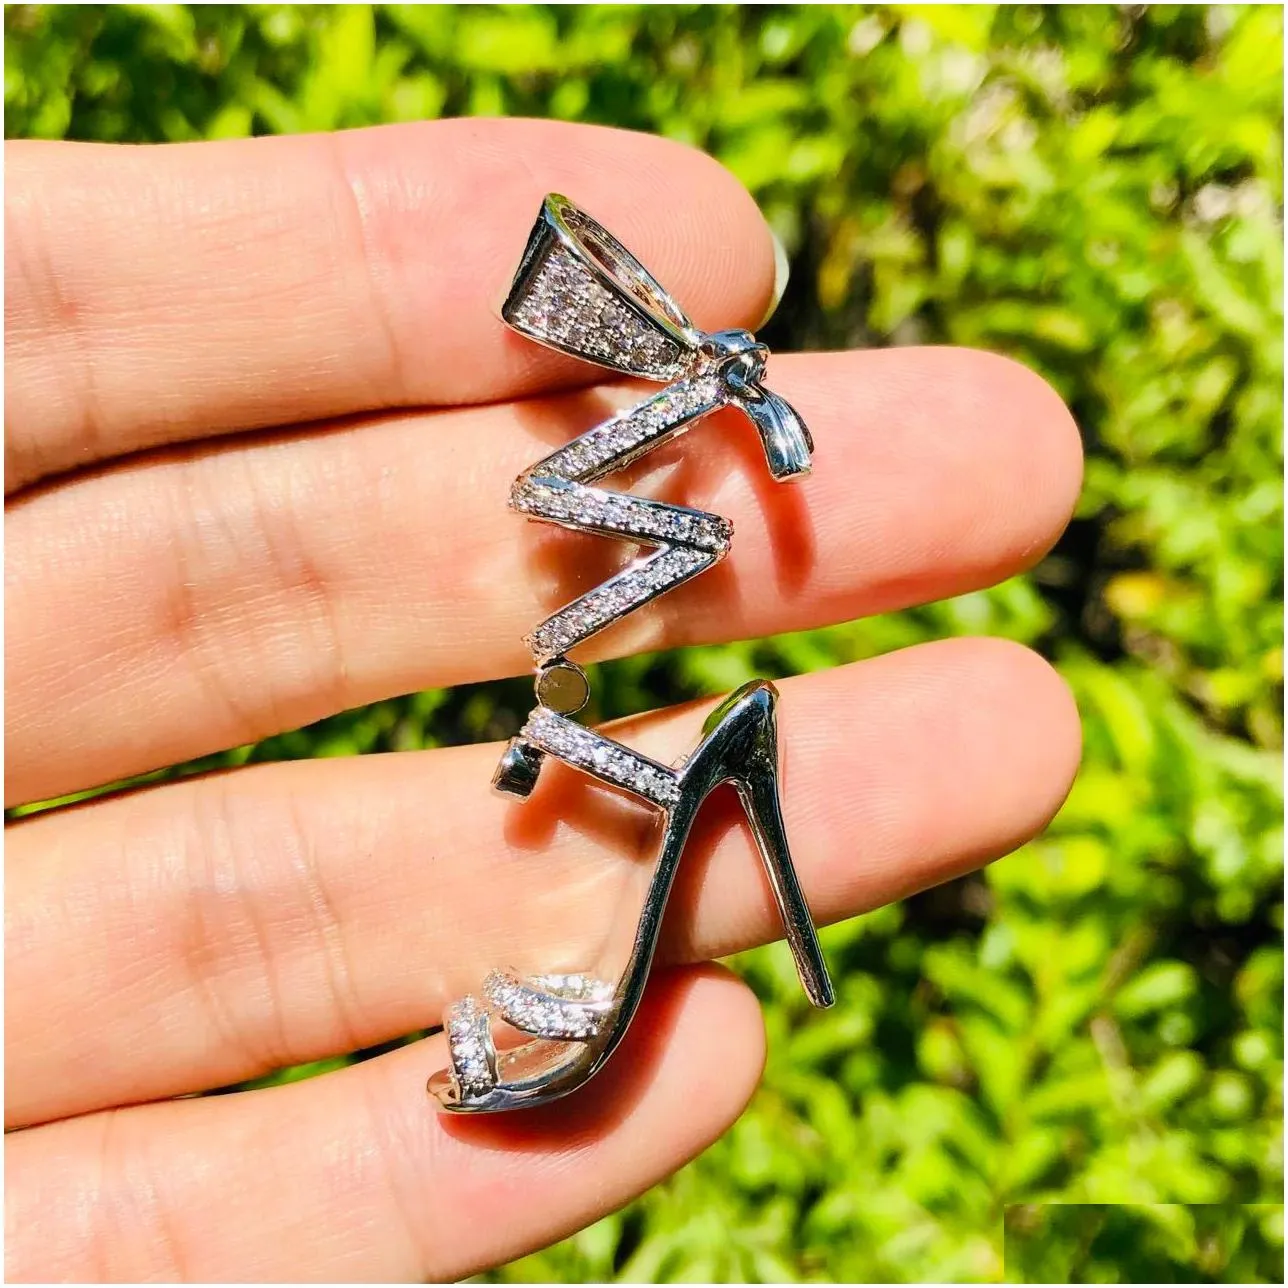 pendant necklaces 5pcs zirconia pave bling woman high heel charm for custom bracelet necklace handmade jewelry acessory finding fashion